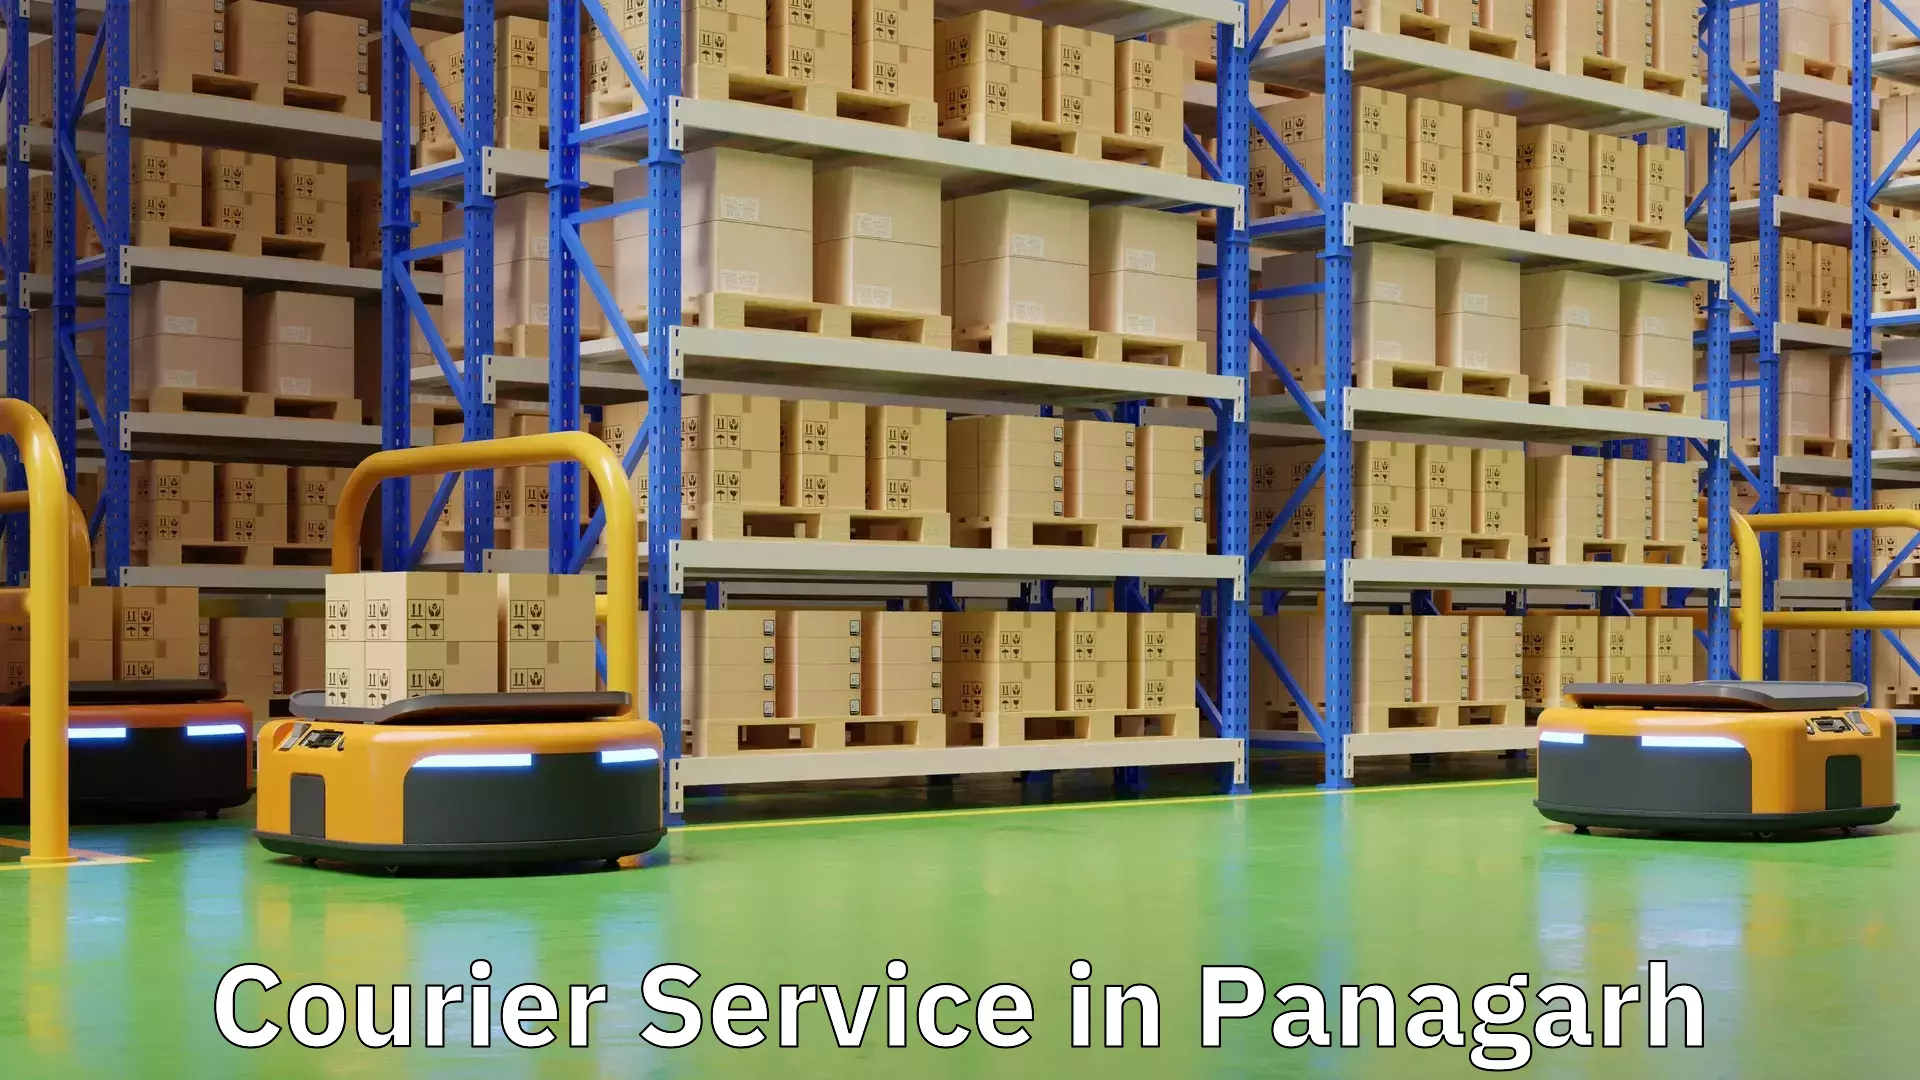 On-demand shipping options in Panagarh